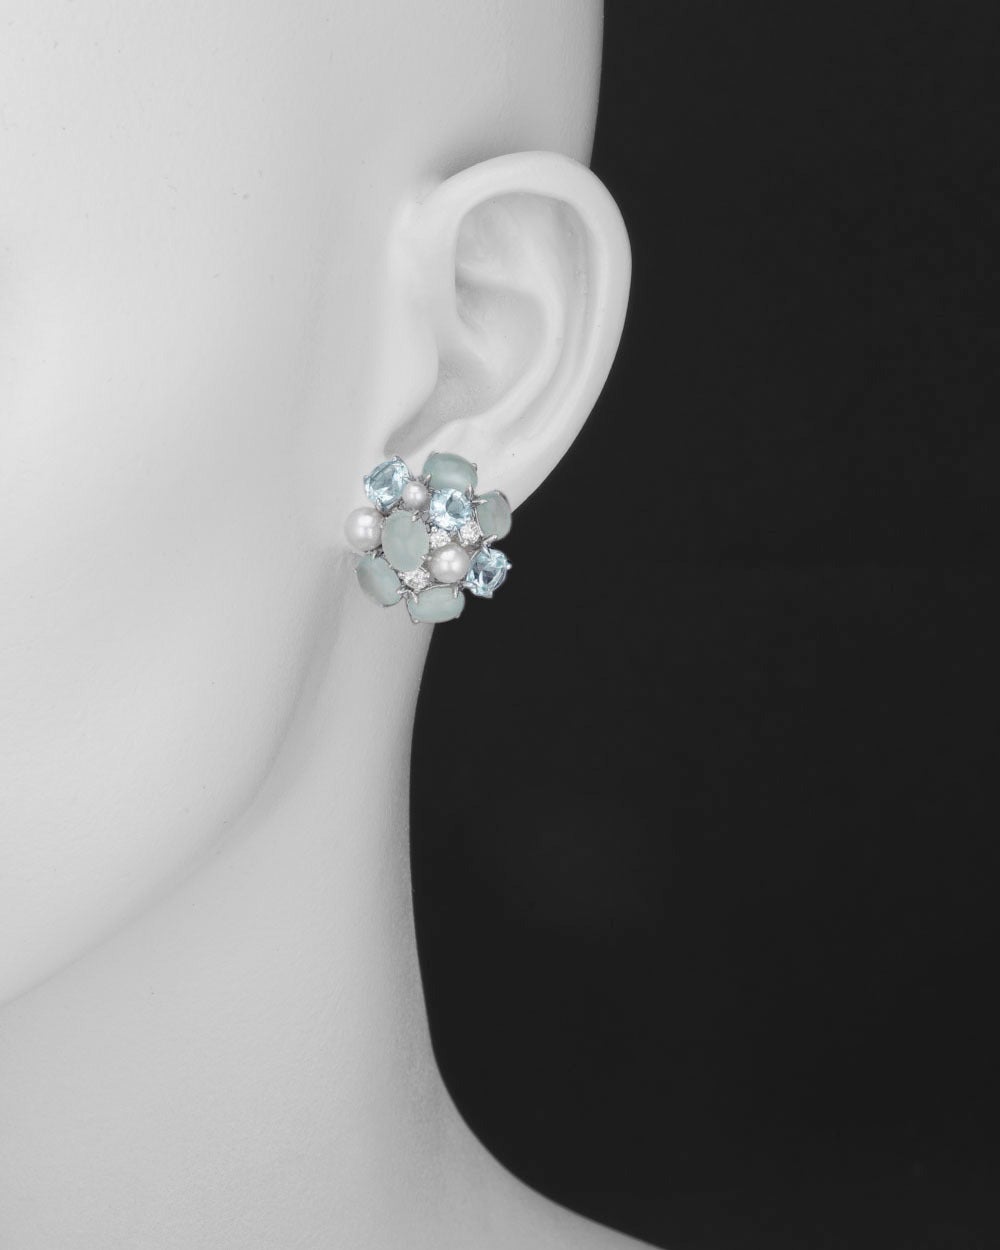 Bubble aquamarine, pearl and diamond earclips, designed as a cluster of cabochon-cut and faceted aquamarines weighing approximately 33 total carats, with round freshwater pearl and circular-cut diamond accents, the diamonds weighing approximately